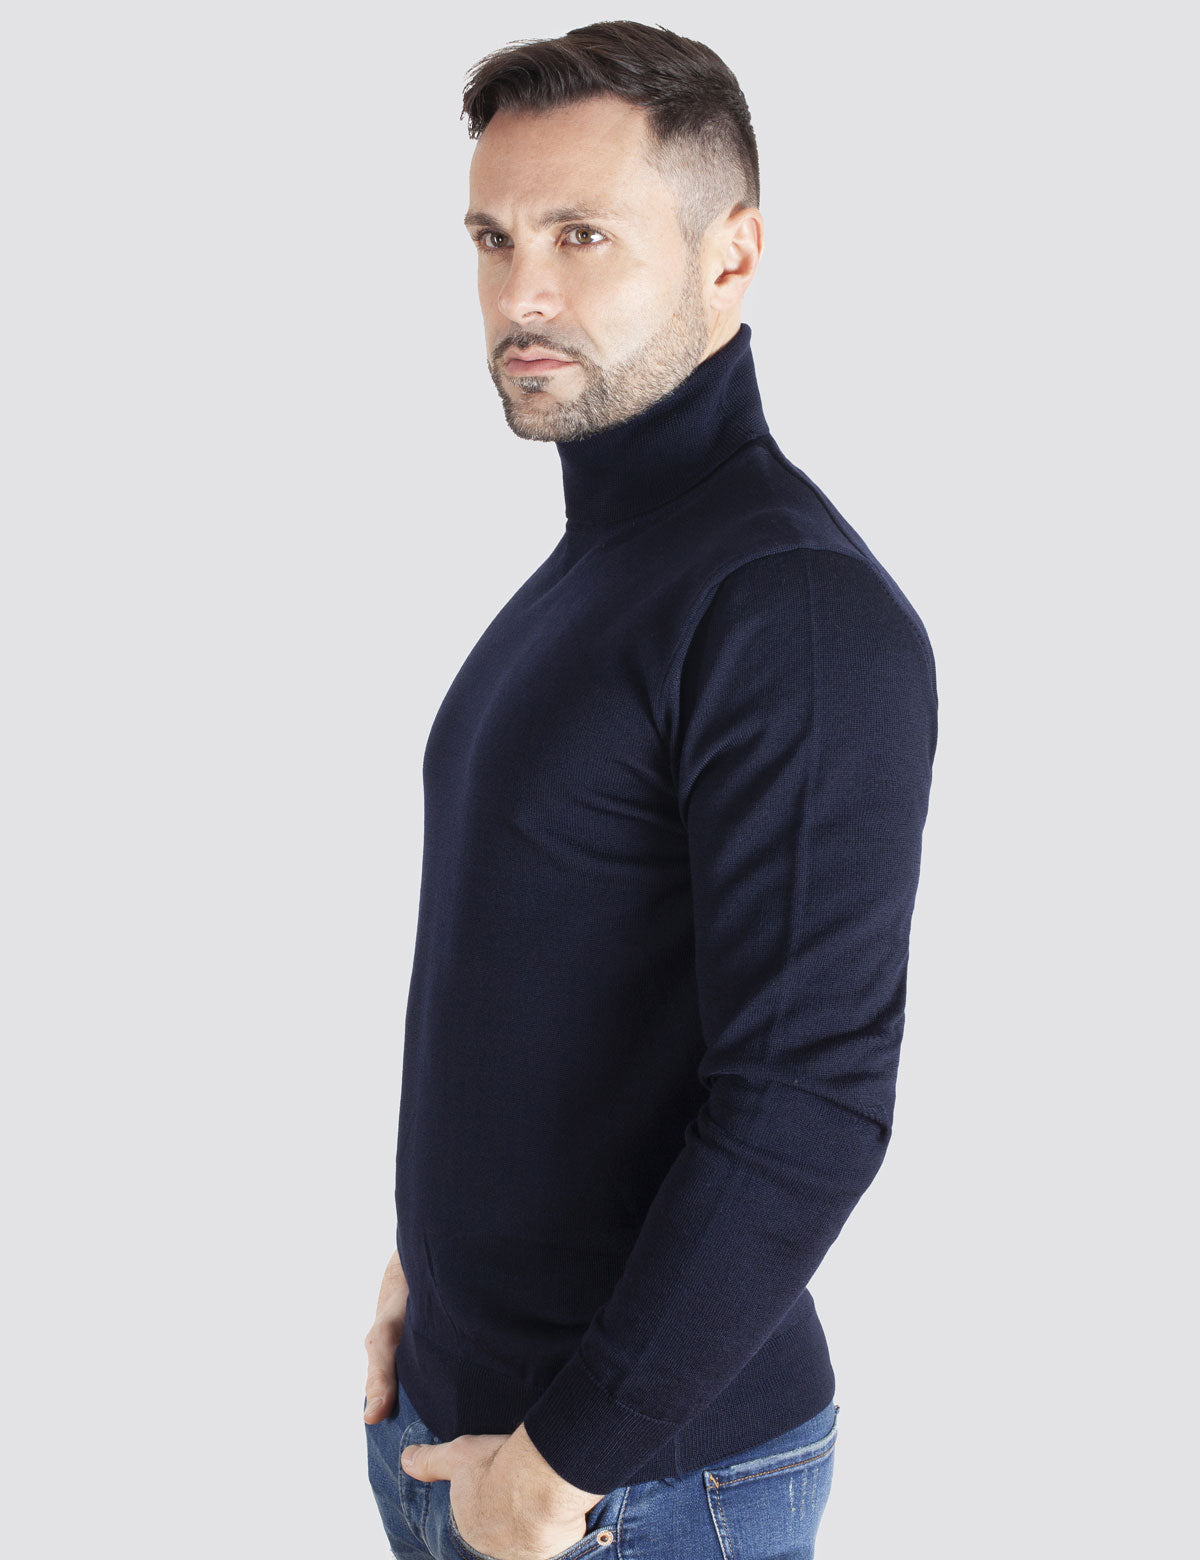 Pull à Col Roulé - Homme, Automne/Hiver - 100% Laine Vierge Mérinos Extrafine Sans Mulesing - 100% Made in Italy | Brunella Gori